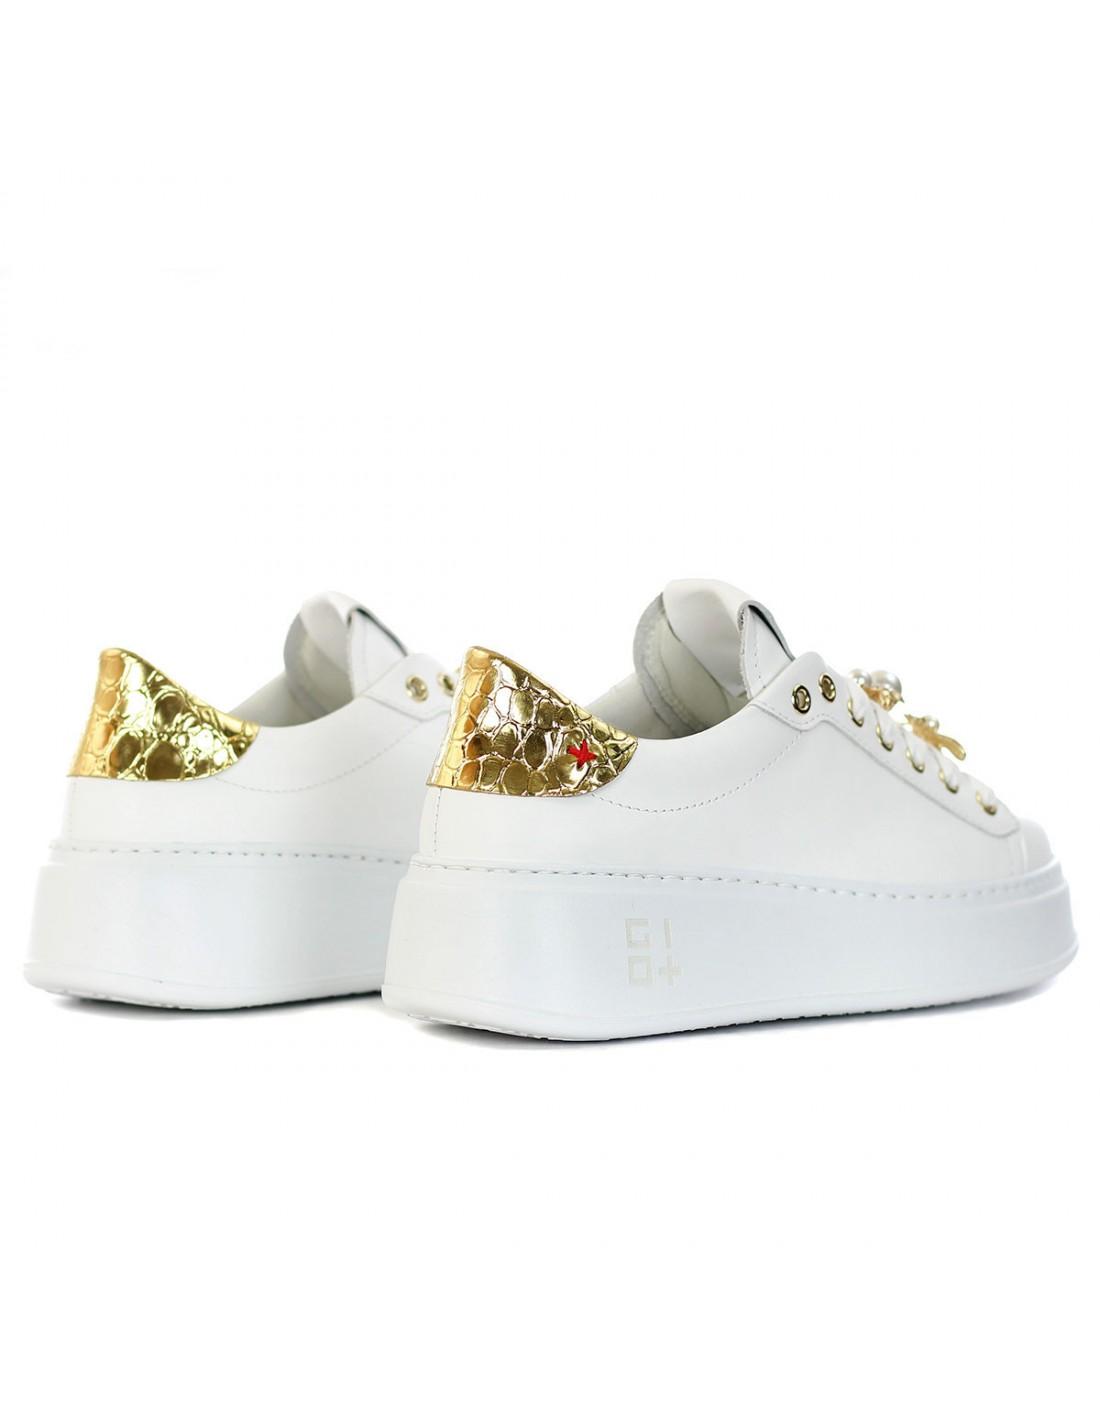 GIO+ + - Sneakers With Removable Accessory - Color: in White | Lyst